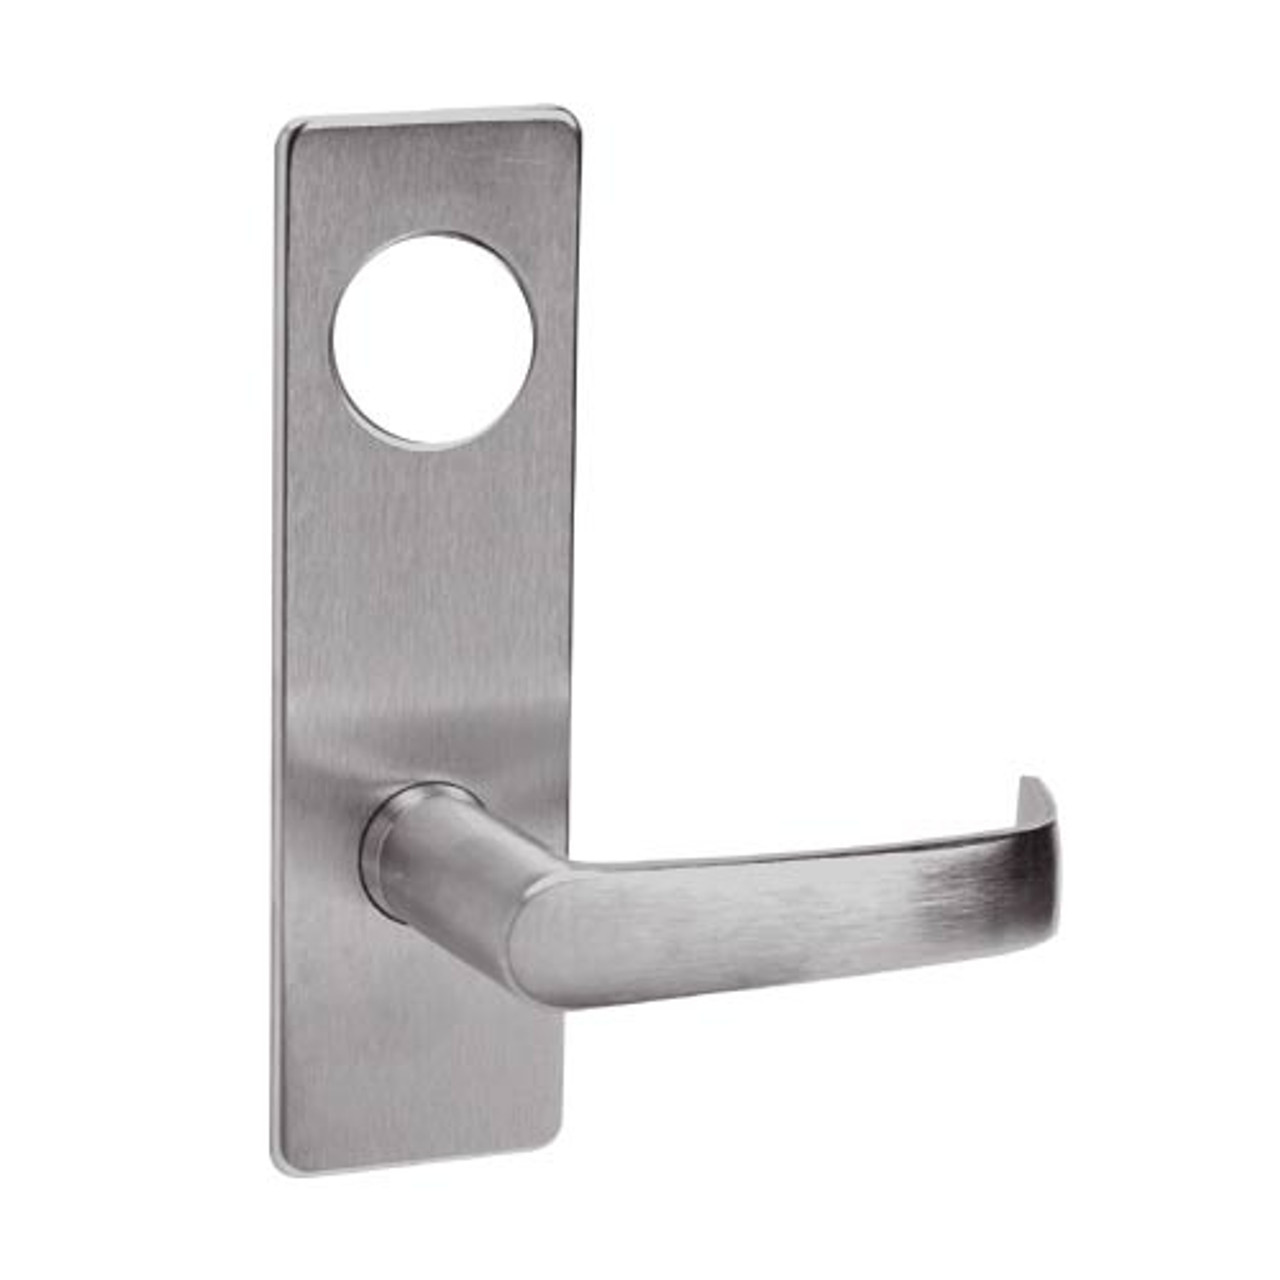 ML2057-NSP-630-CL7 Corbin Russwin ML2000 Series IC 7-Pin Less Core Mortise Storeroom Locksets with Newport Lever in Satin Stainless